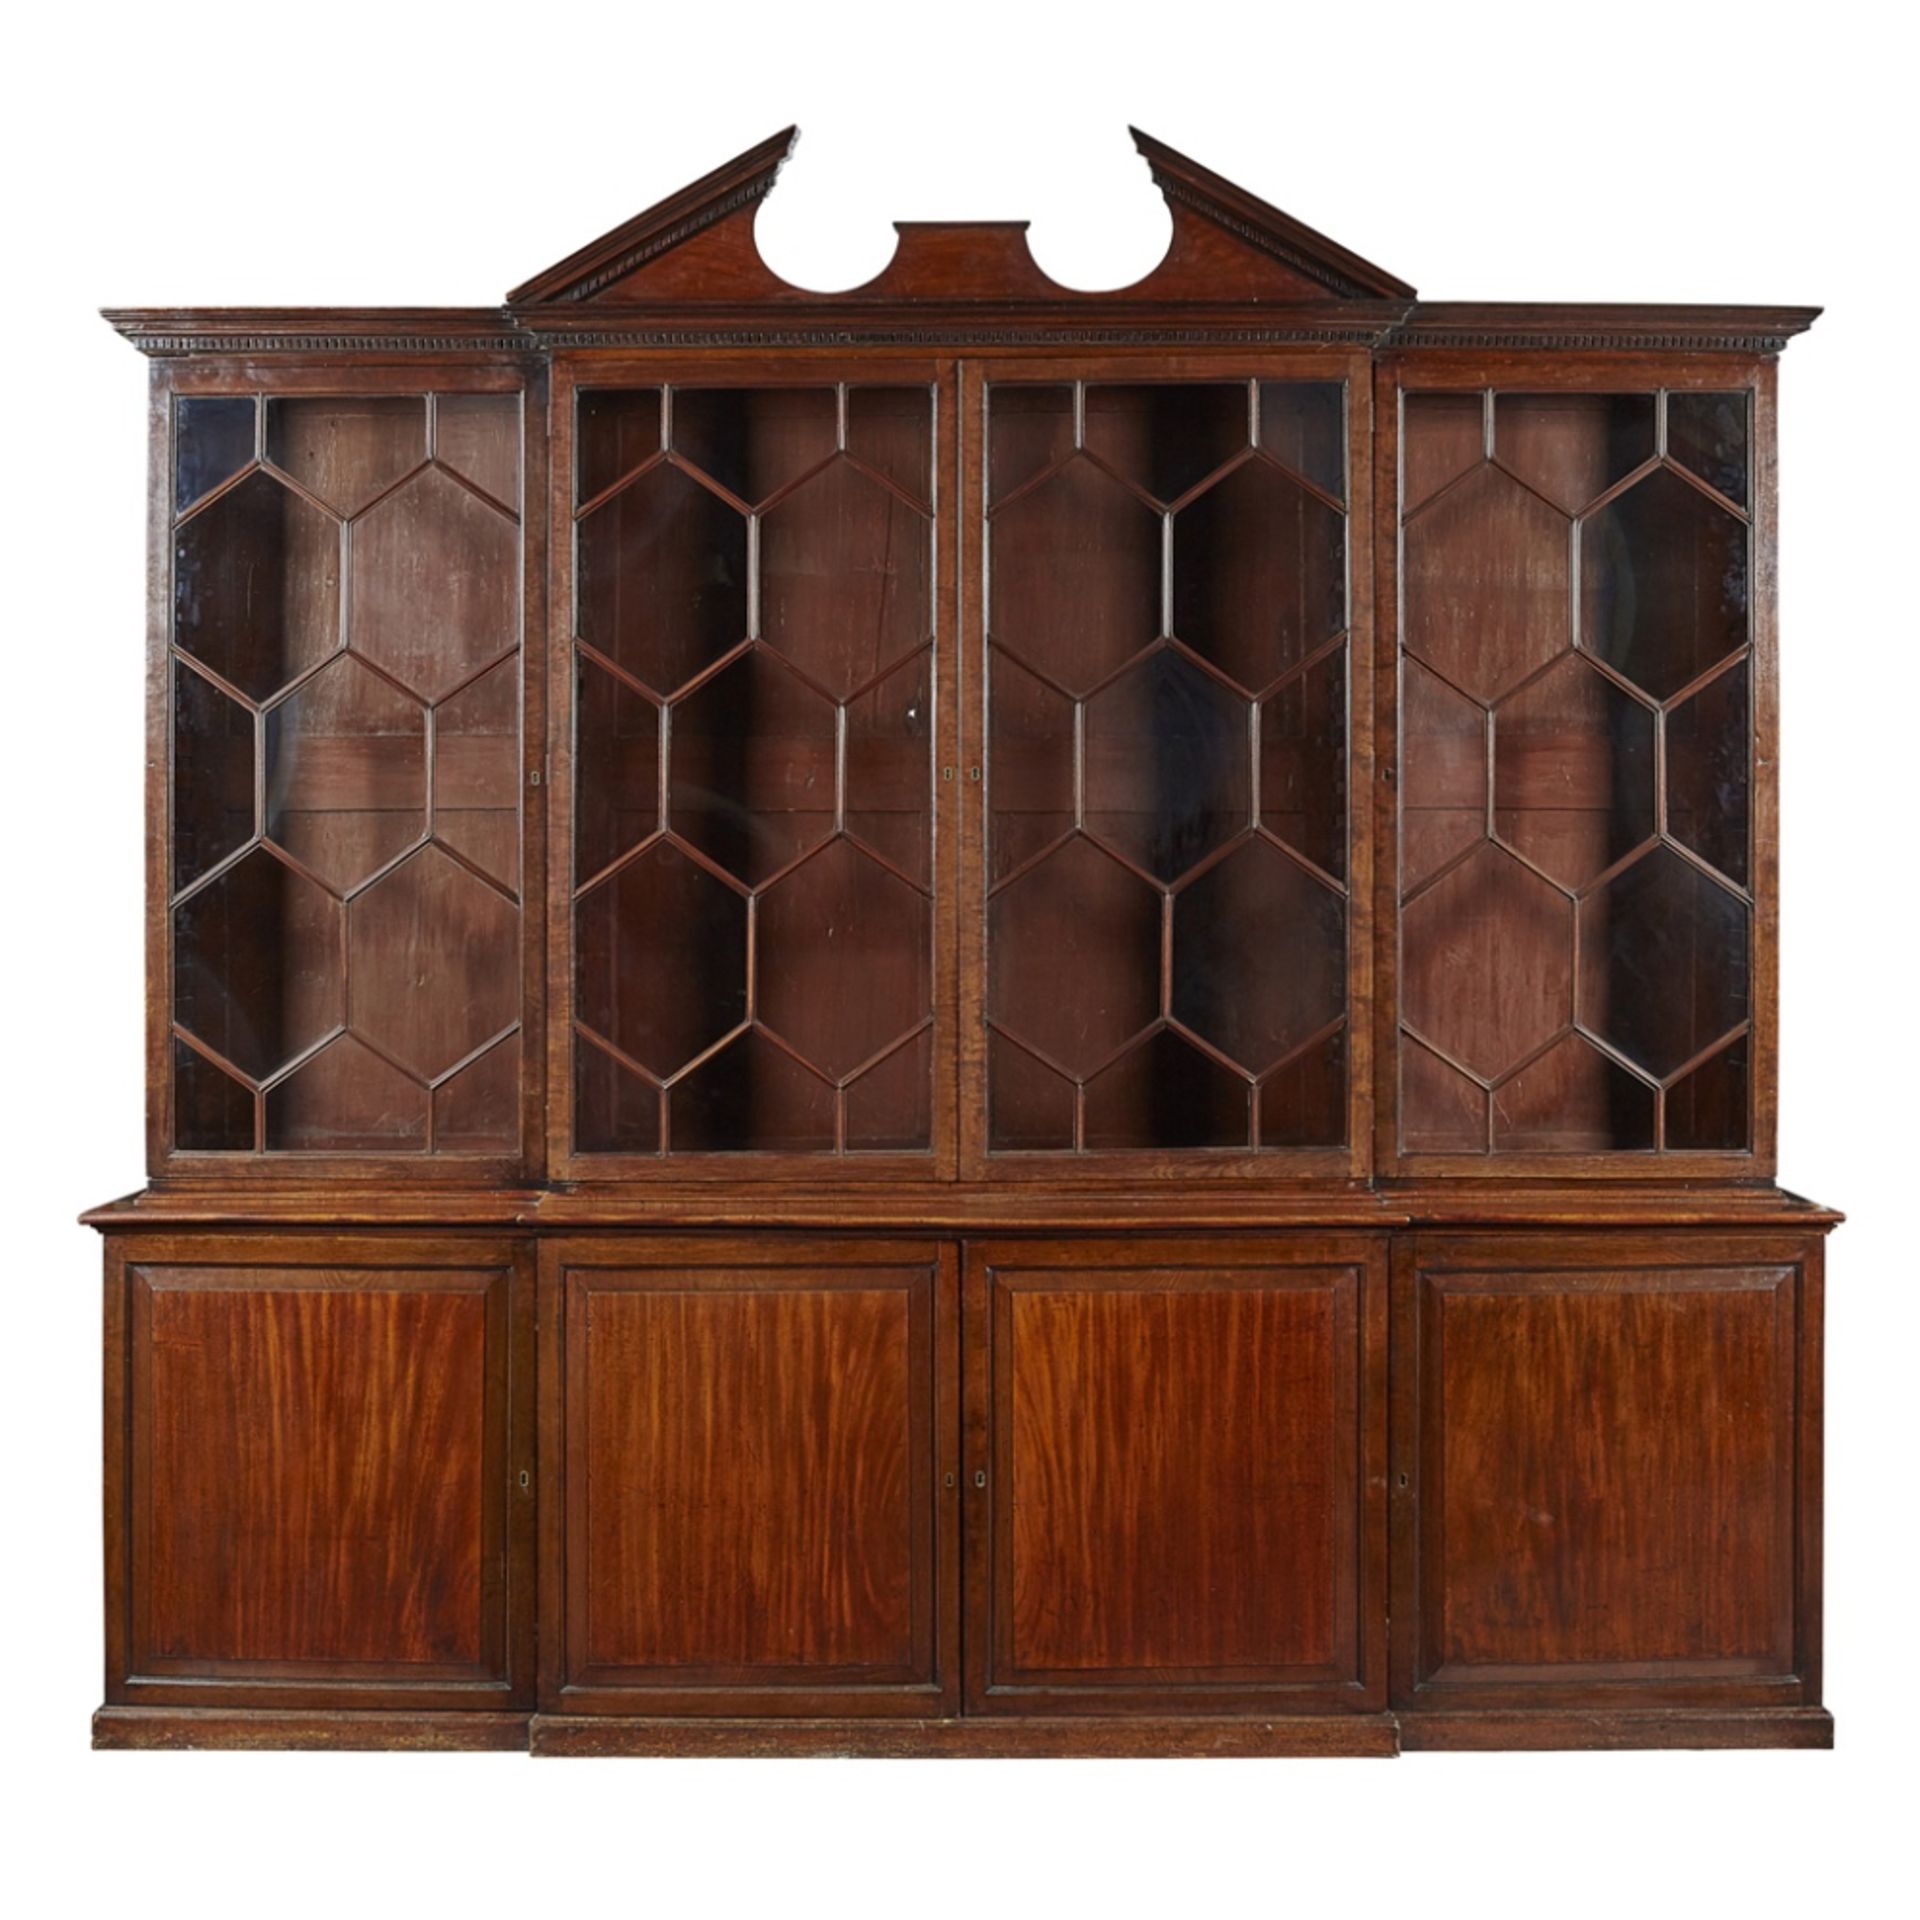 GEORGE III MAHOGANY BREAKFRONT LIBRARY BOOKCASE, AFTER A DESIGN BY THOMAS CHIPPENDALEMID 18TH